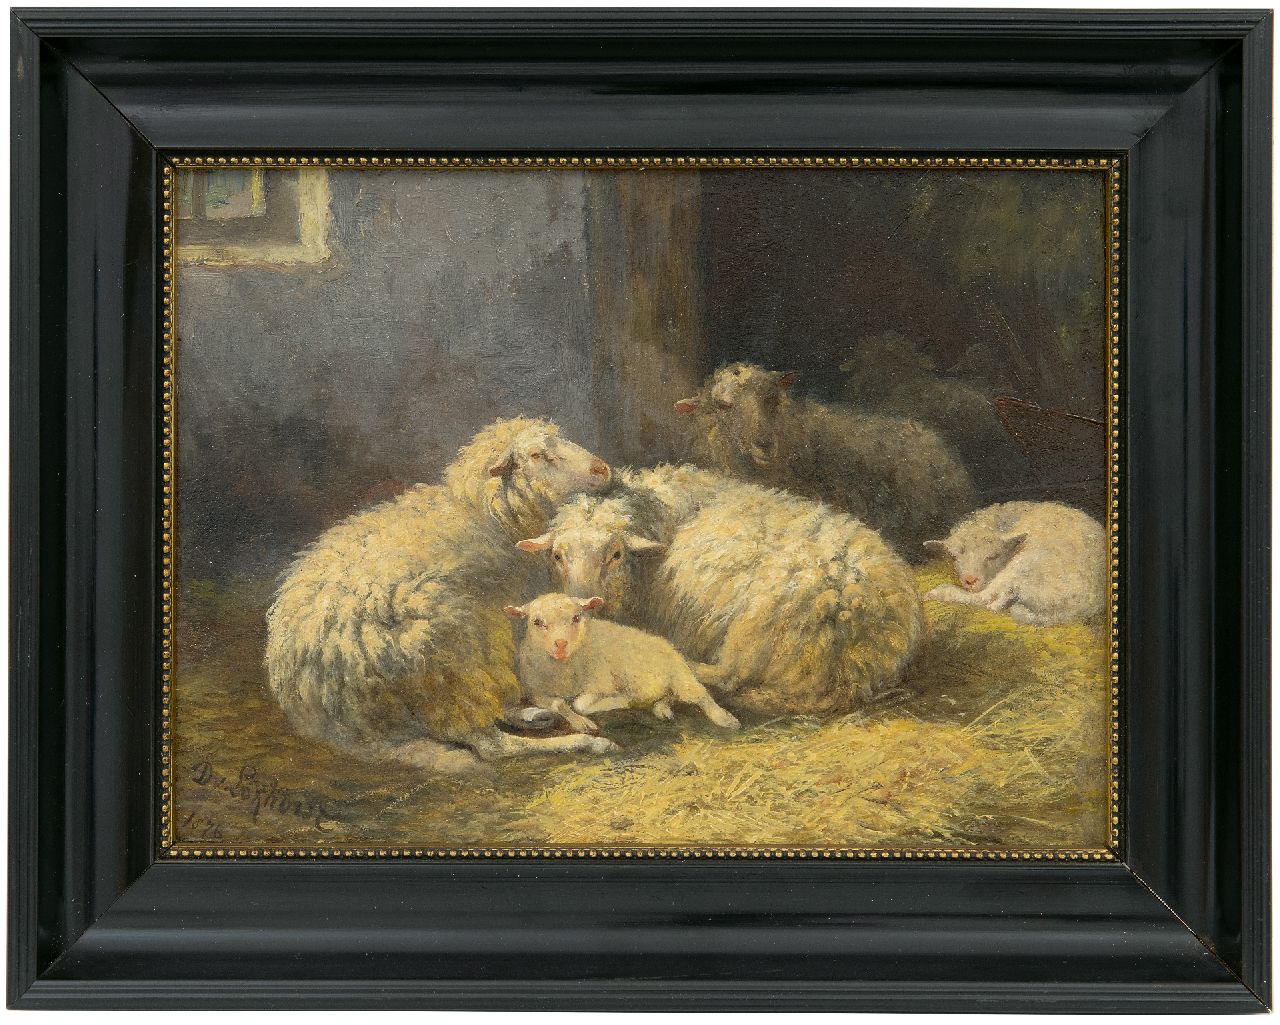 Lokhorst D. van | Dirk van Lokhorst | Paintings offered for sale | Sheep and lambs in a stable, oil on panel 18.0 x 24.7 cm, signed l.l. and dated 1876